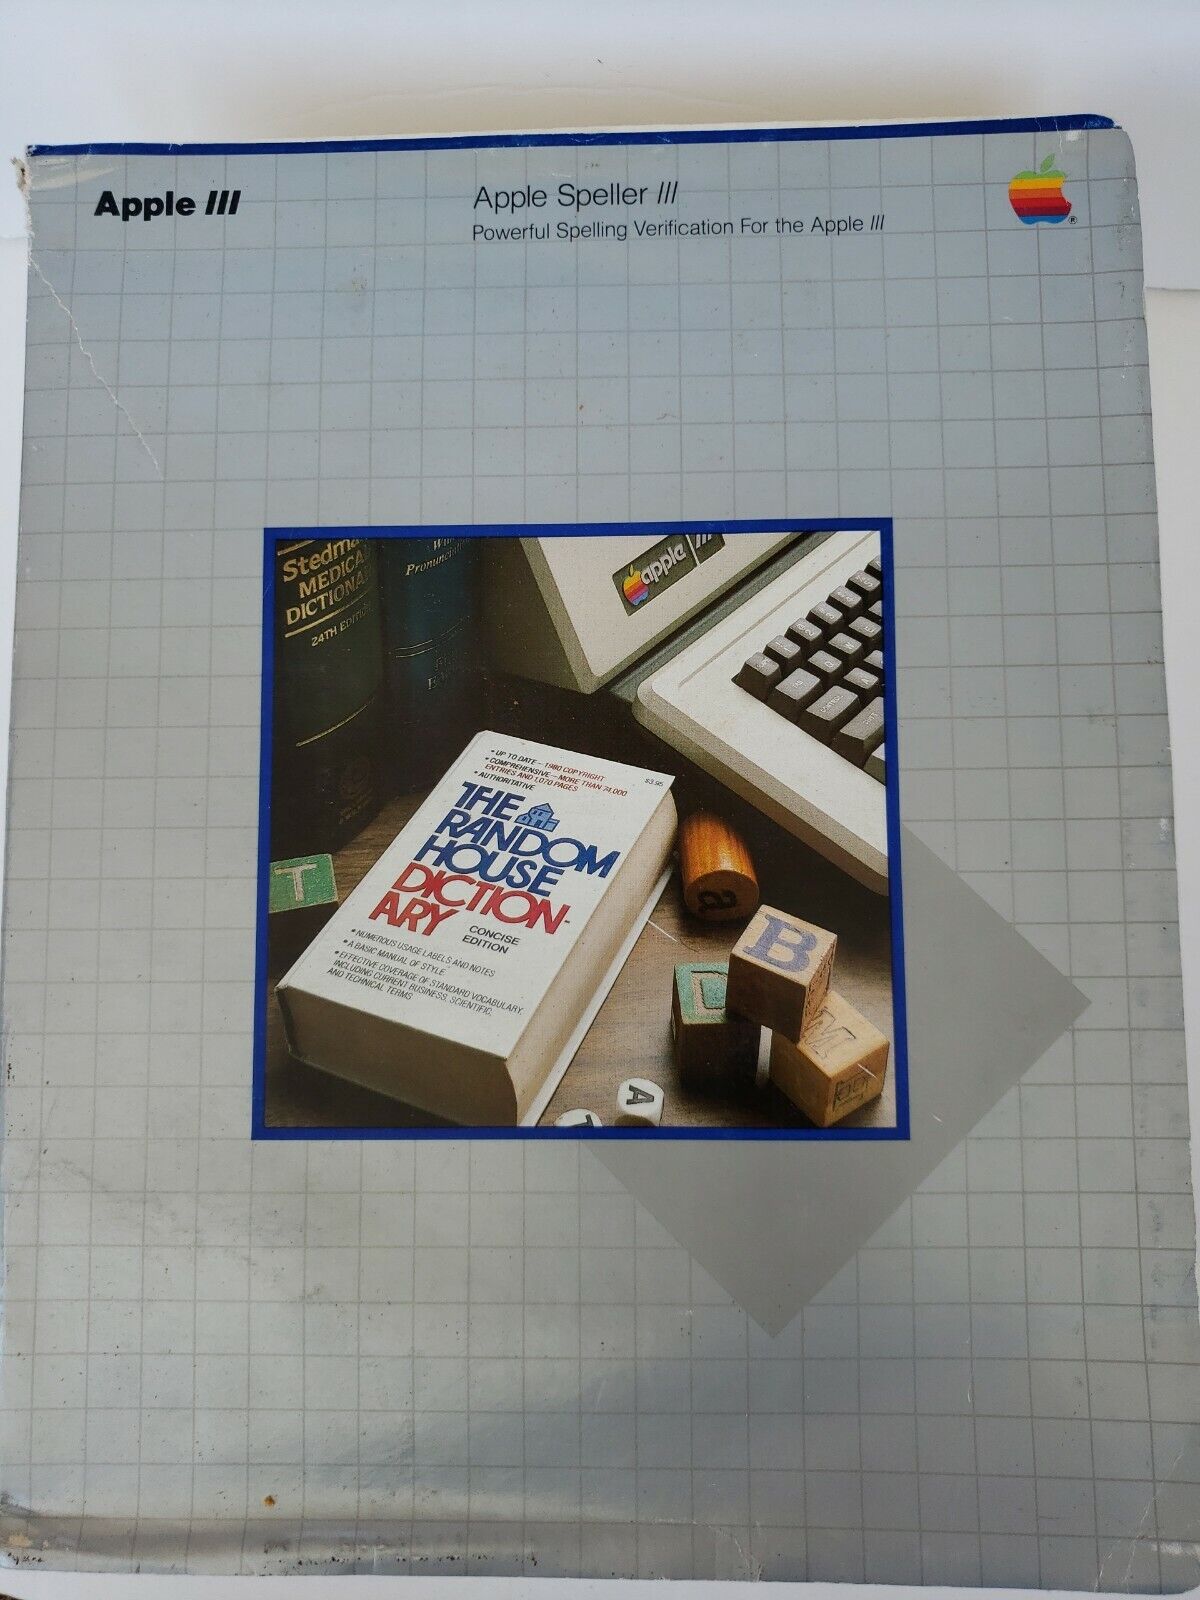 Apple Speller Vintage 1982 Software Box and Packing List Computer